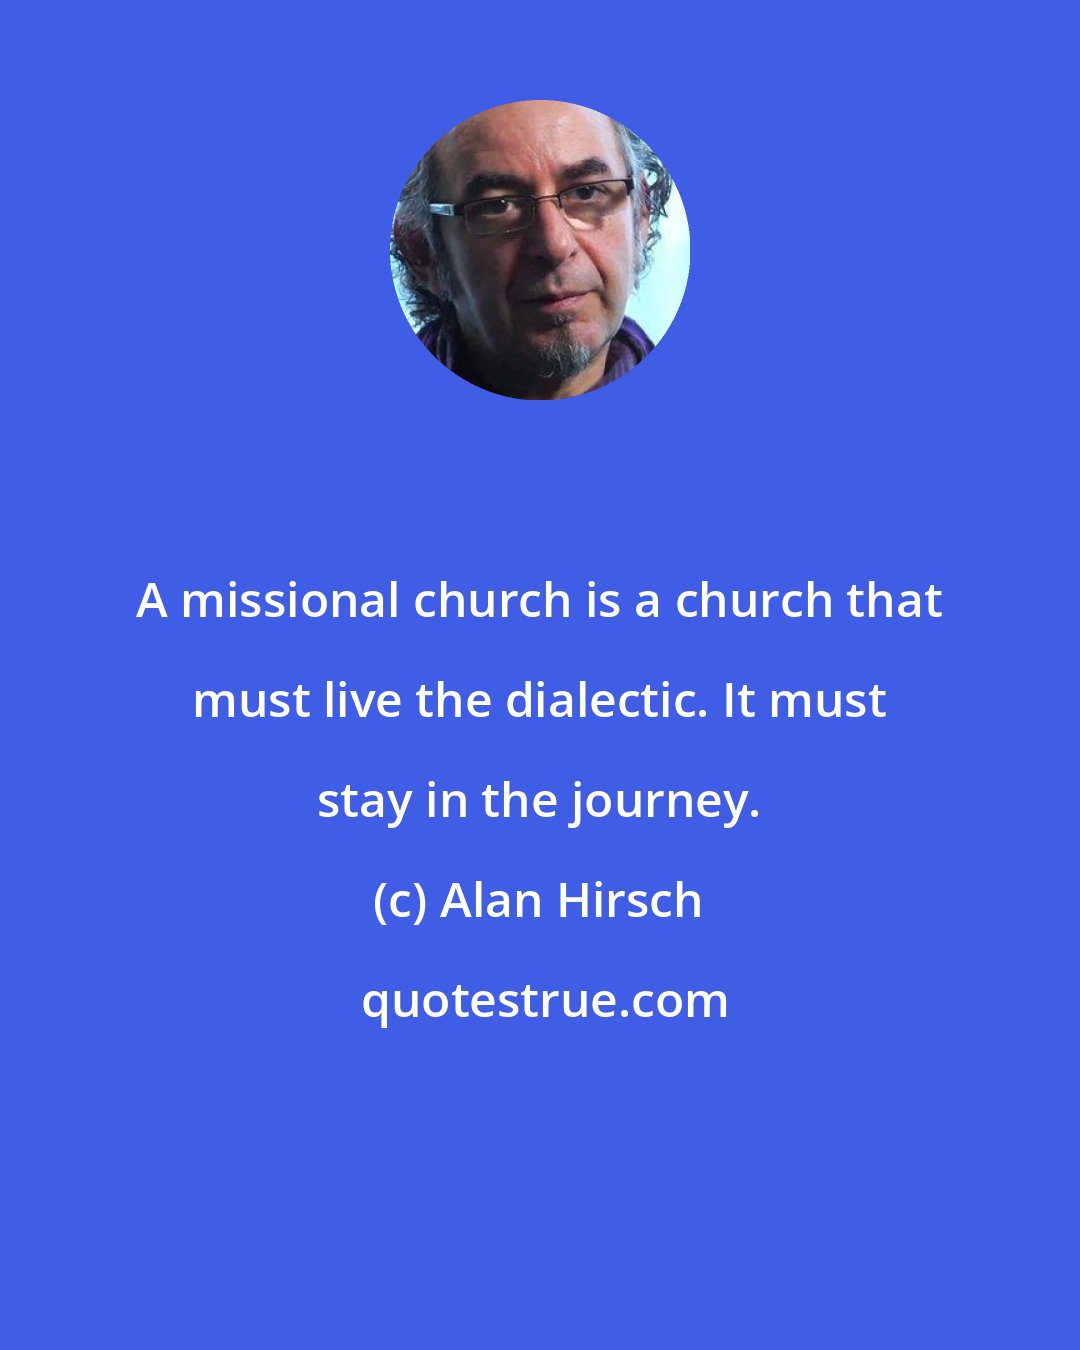 Alan Hirsch: A missional church is a church that must live the dialectic. It must stay in the journey.